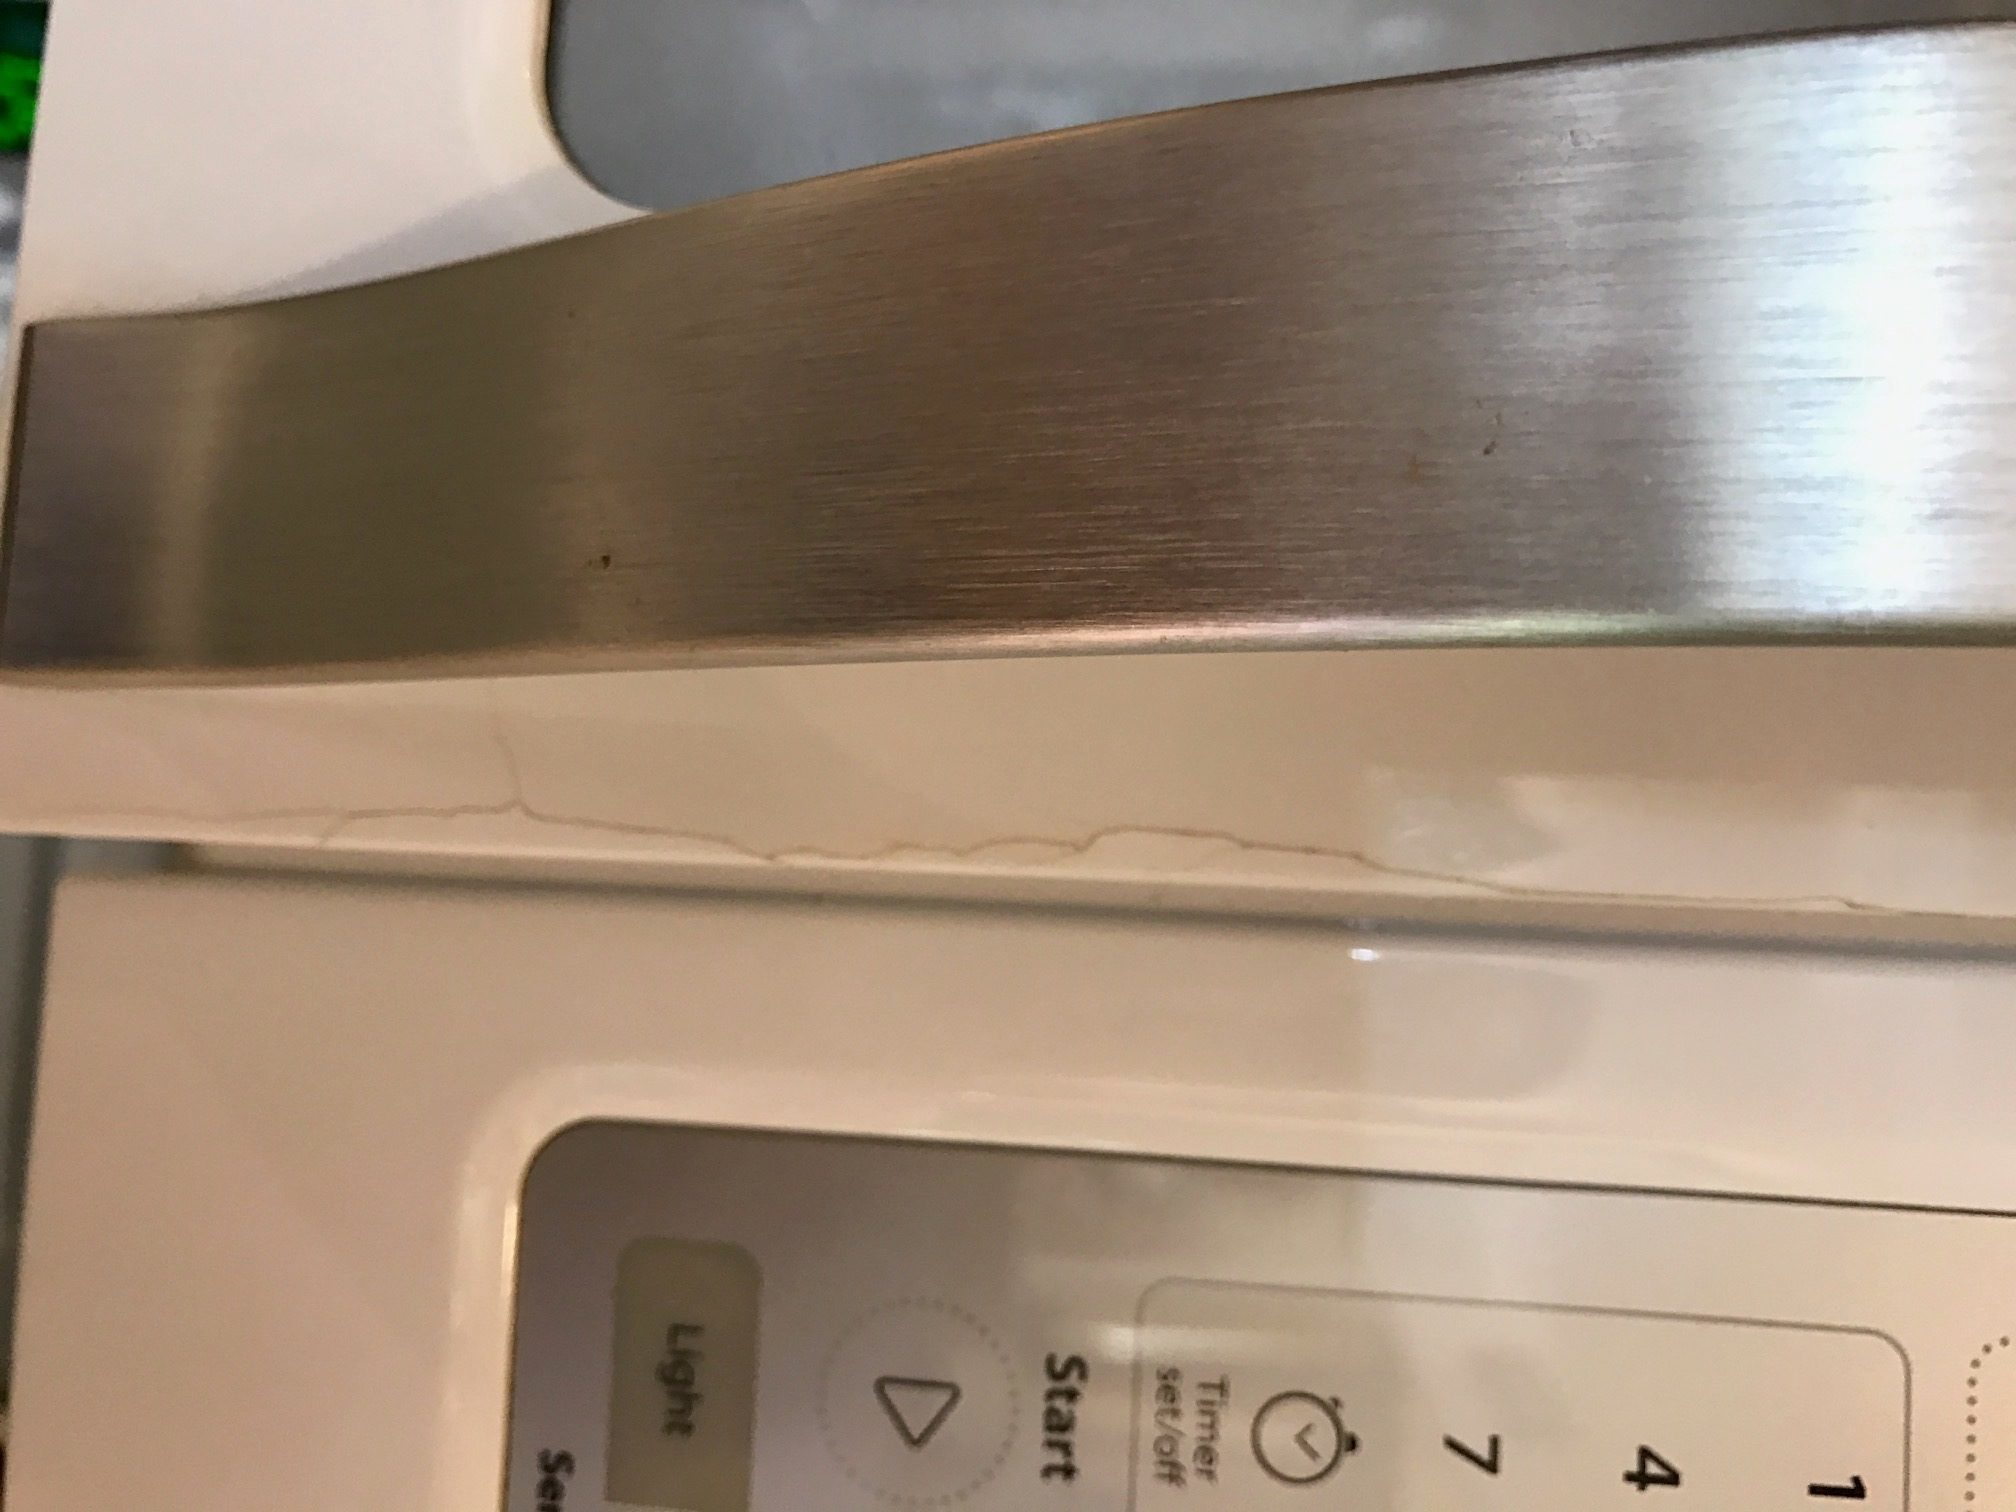 Is there a Whirlpool oven code that indicates service is needed?